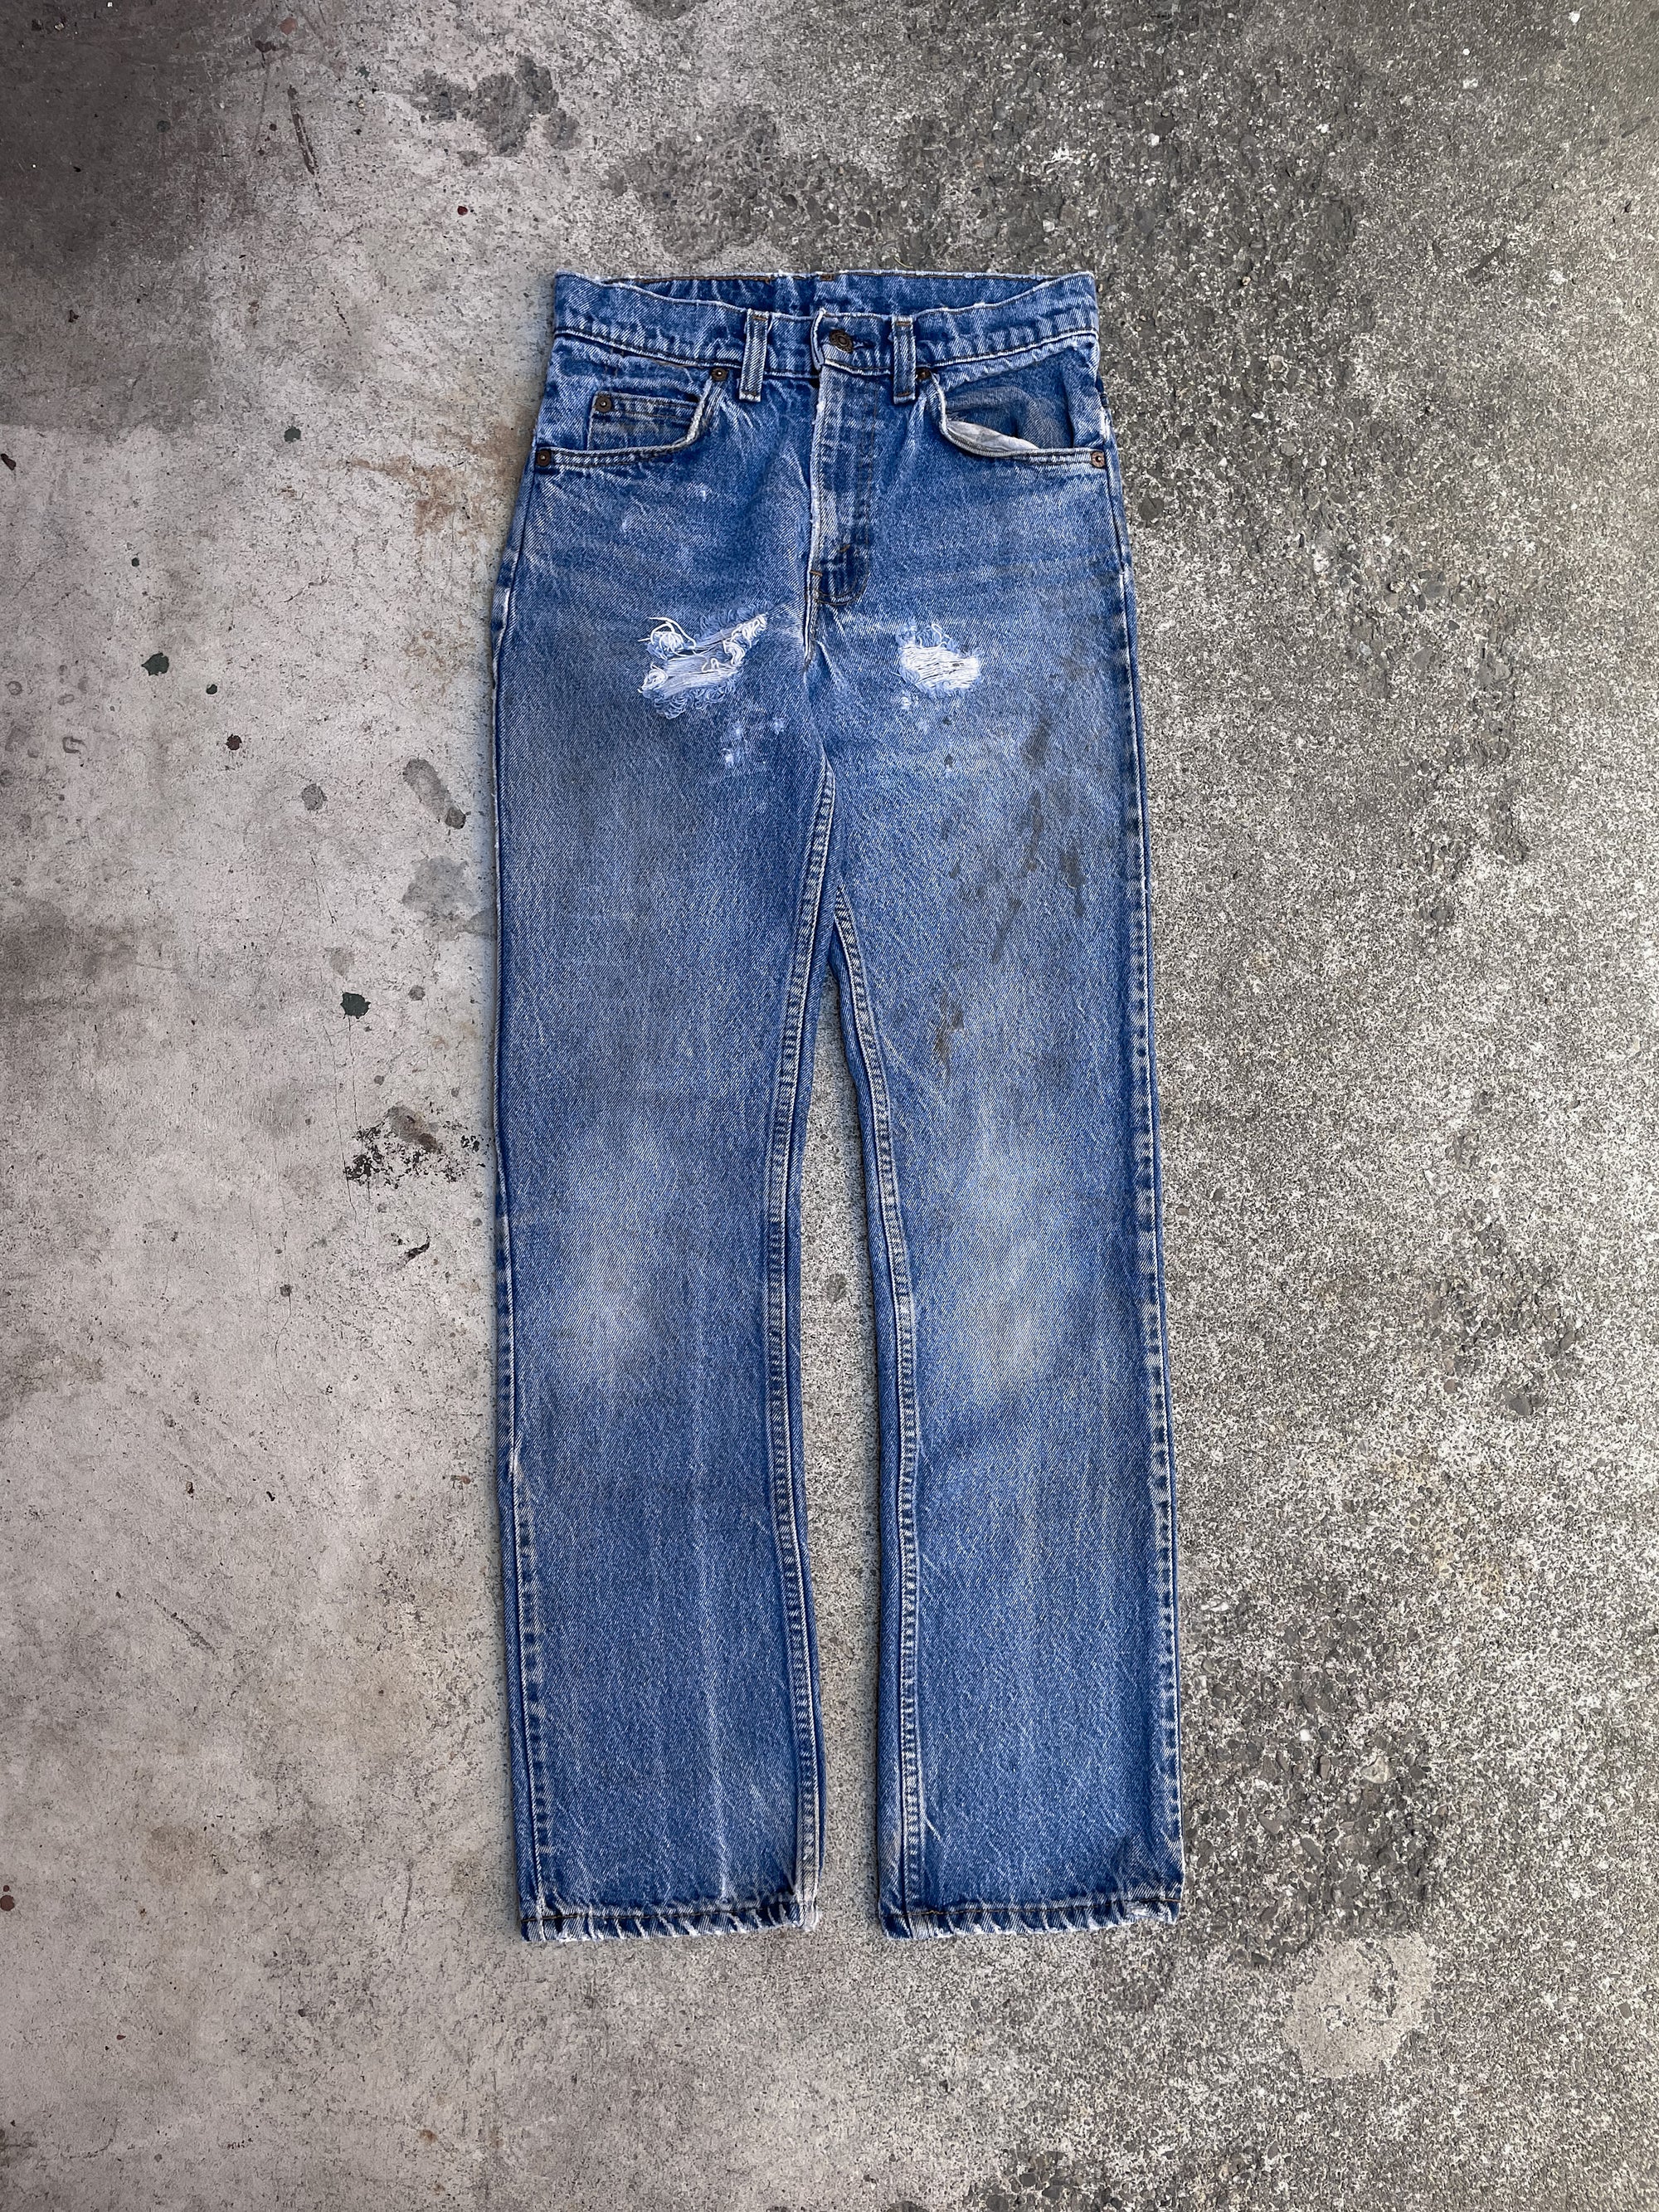 1970s Levi’s Worn In Blue 509 Removed Pocket (26X29)